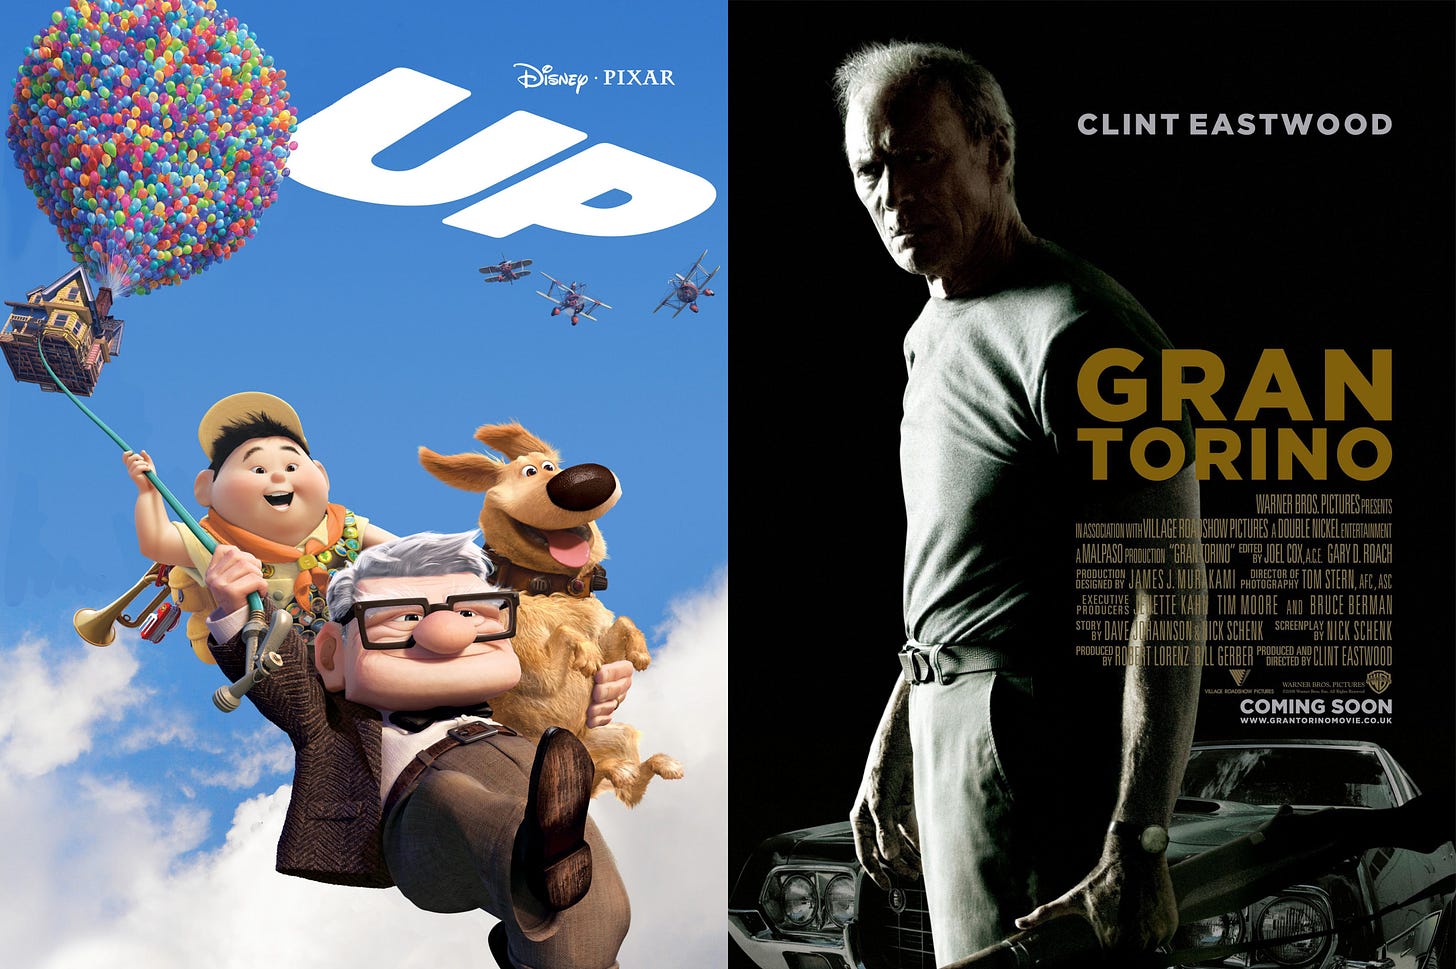 Up (2009) was loosely modeled after Gran Torino (2008) when a Disney  executive felt the company could, "greatly benefit from a child friendly  adaptation of [Gran Torino]." Many changes were made to